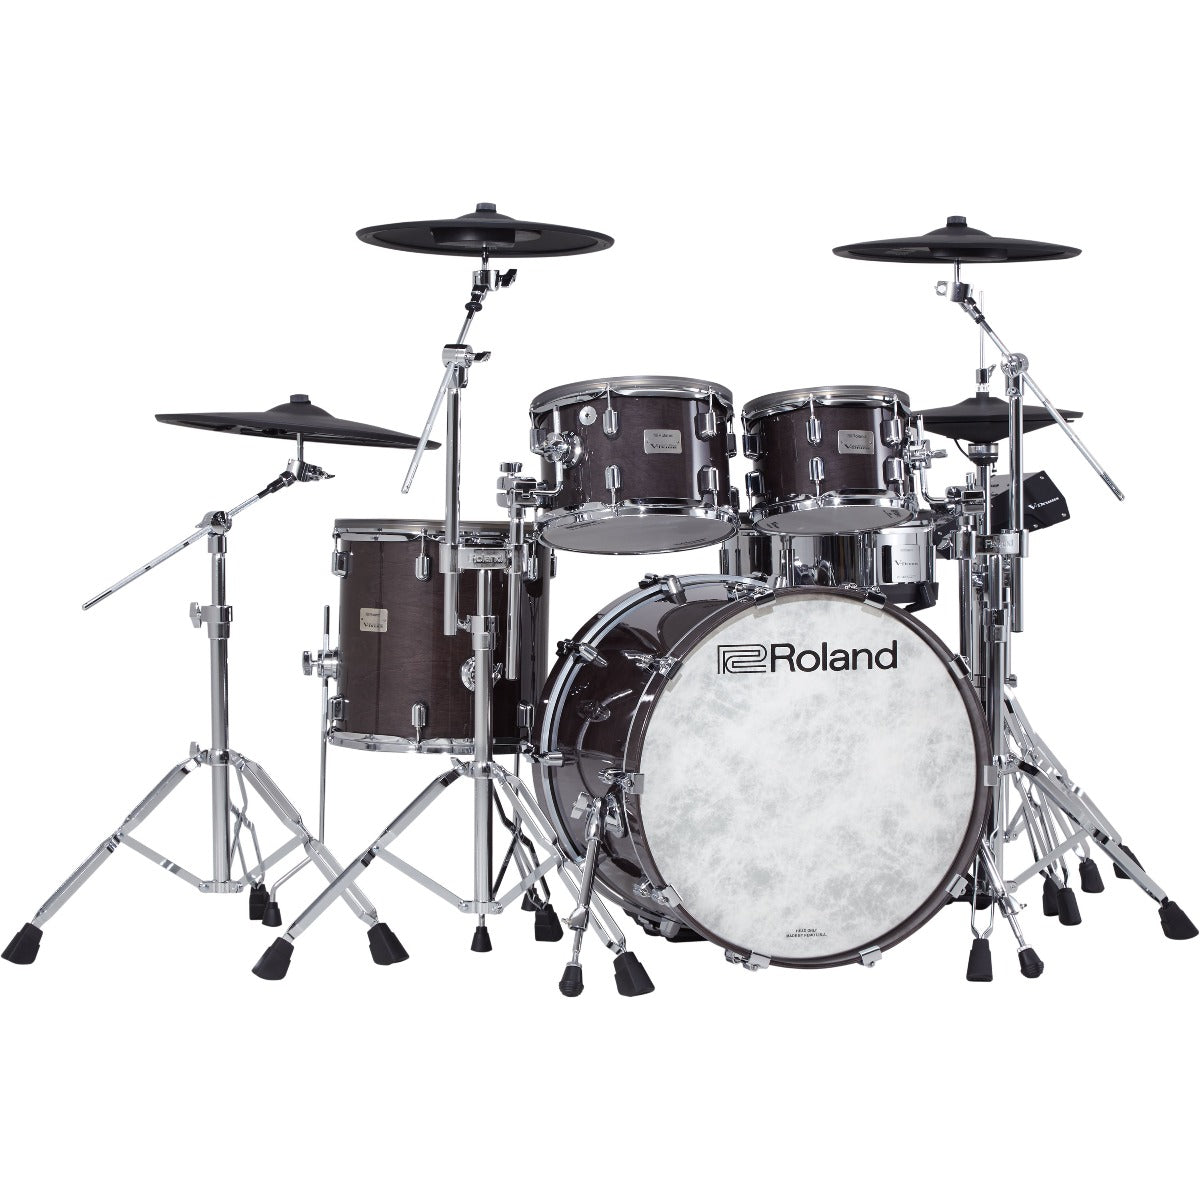 Perspective view of Roland VAD706 V-Drums Acoustic Design 5pc Electronic Drum Set - Gloss Ebony showing front and left side